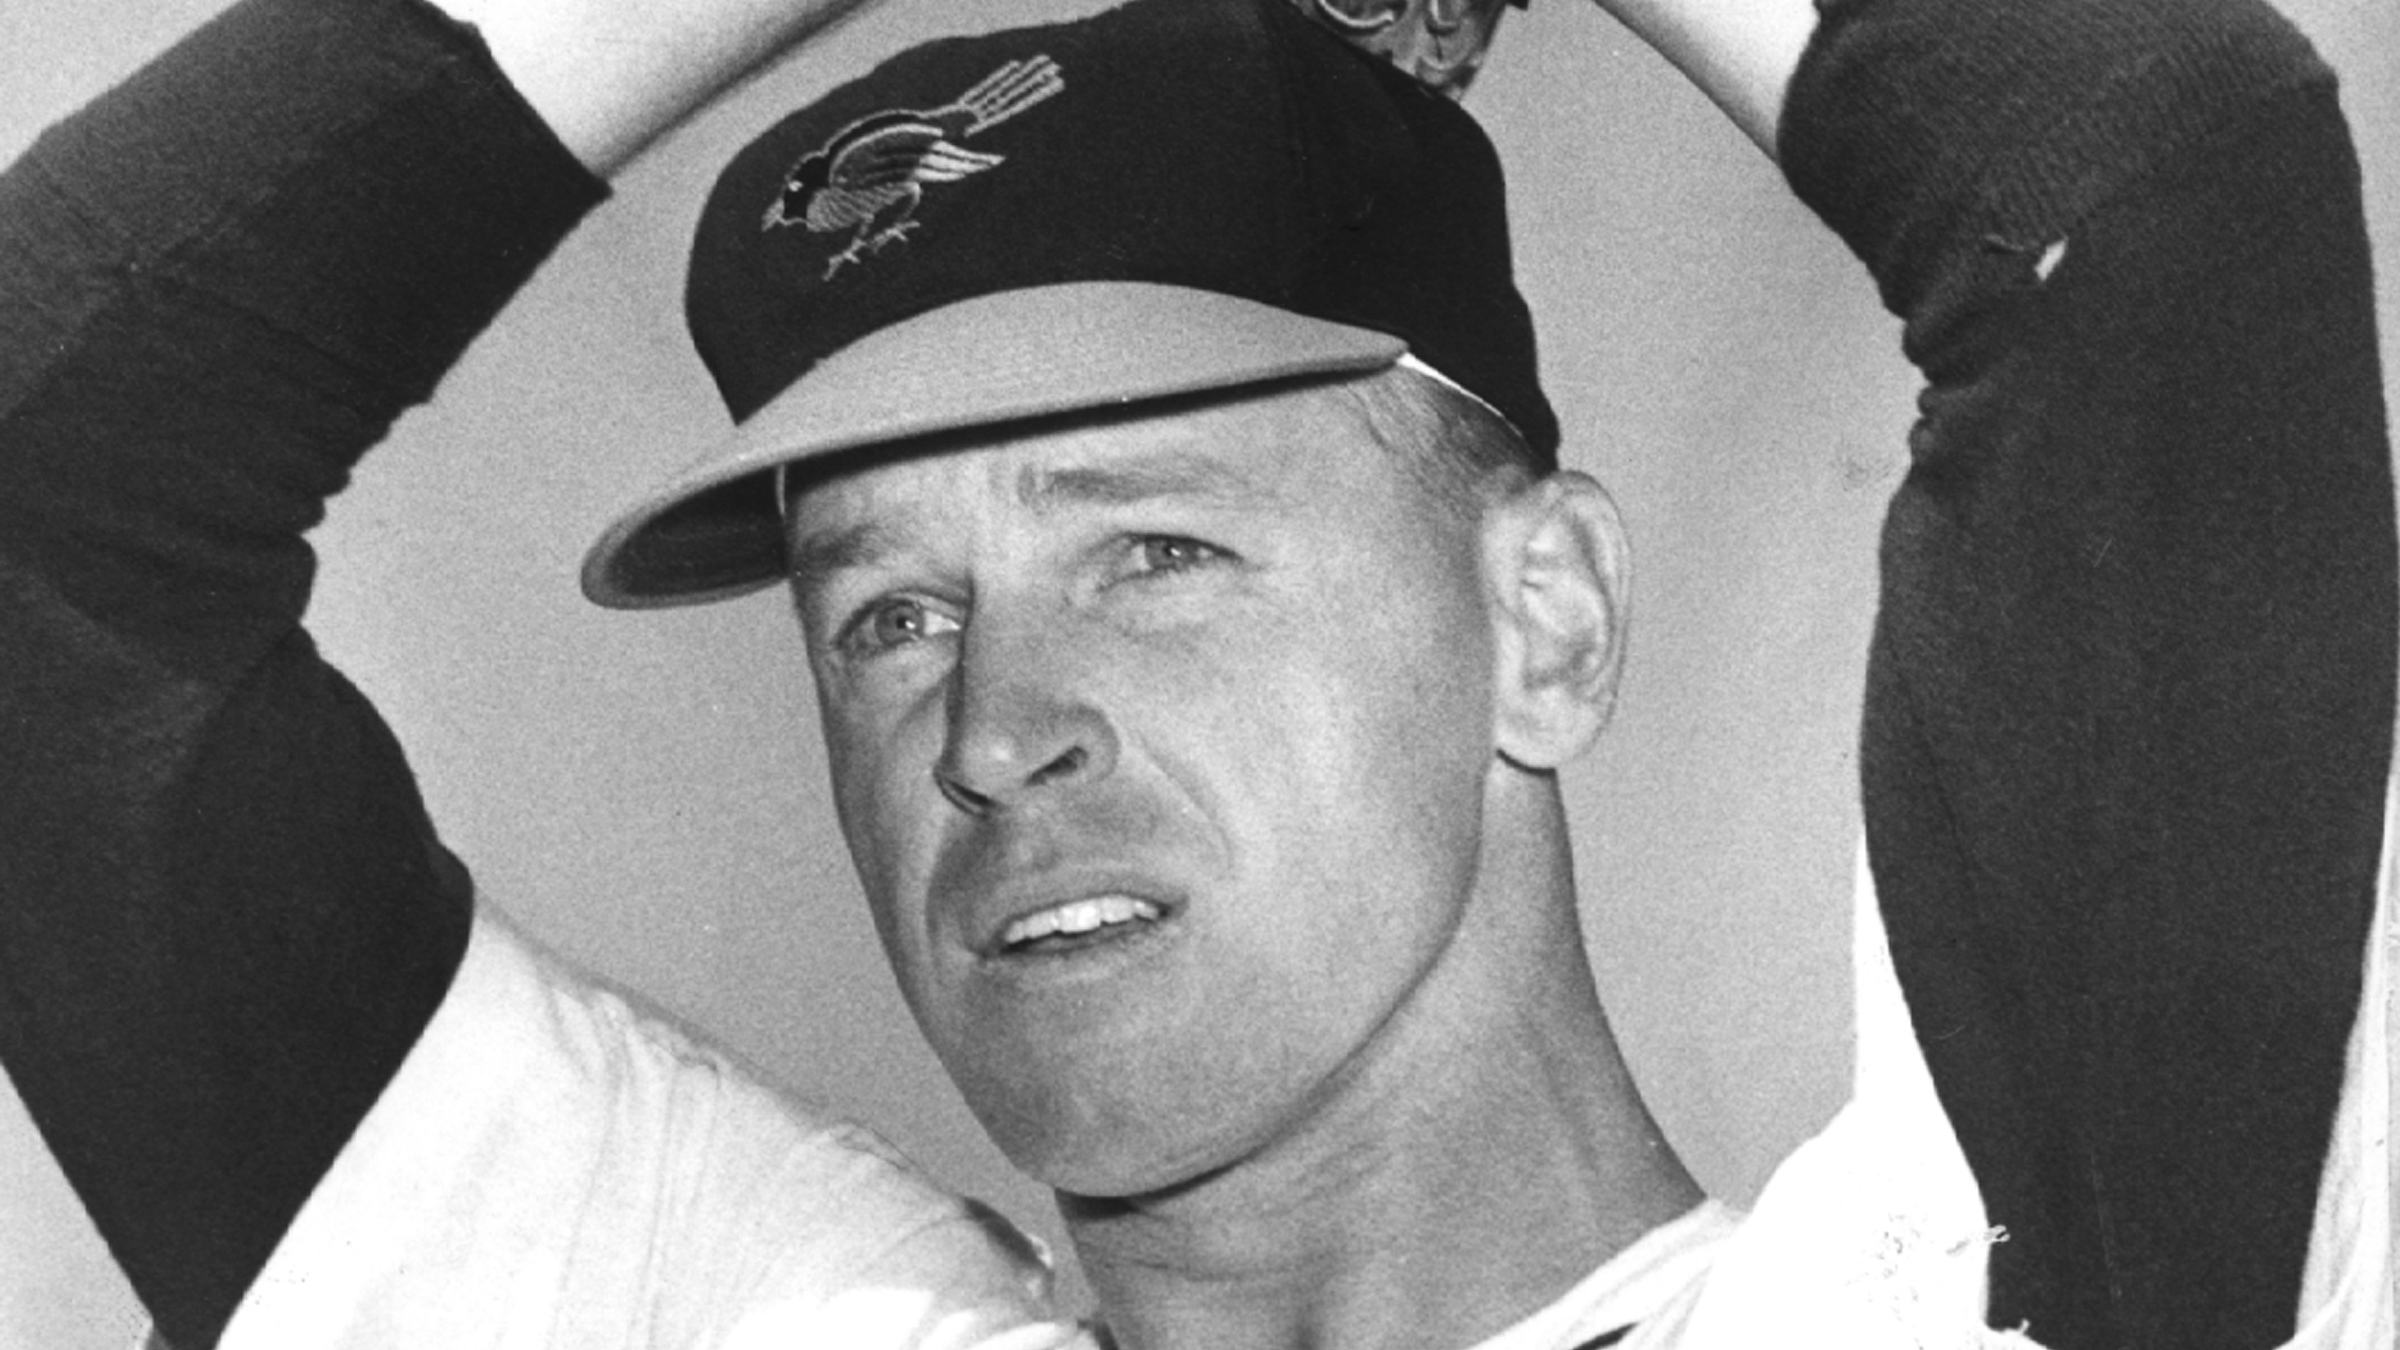 Dick Hall was an Orioles Hall of Fame reliever with impeccable control who helped Baltimore win two World Series.